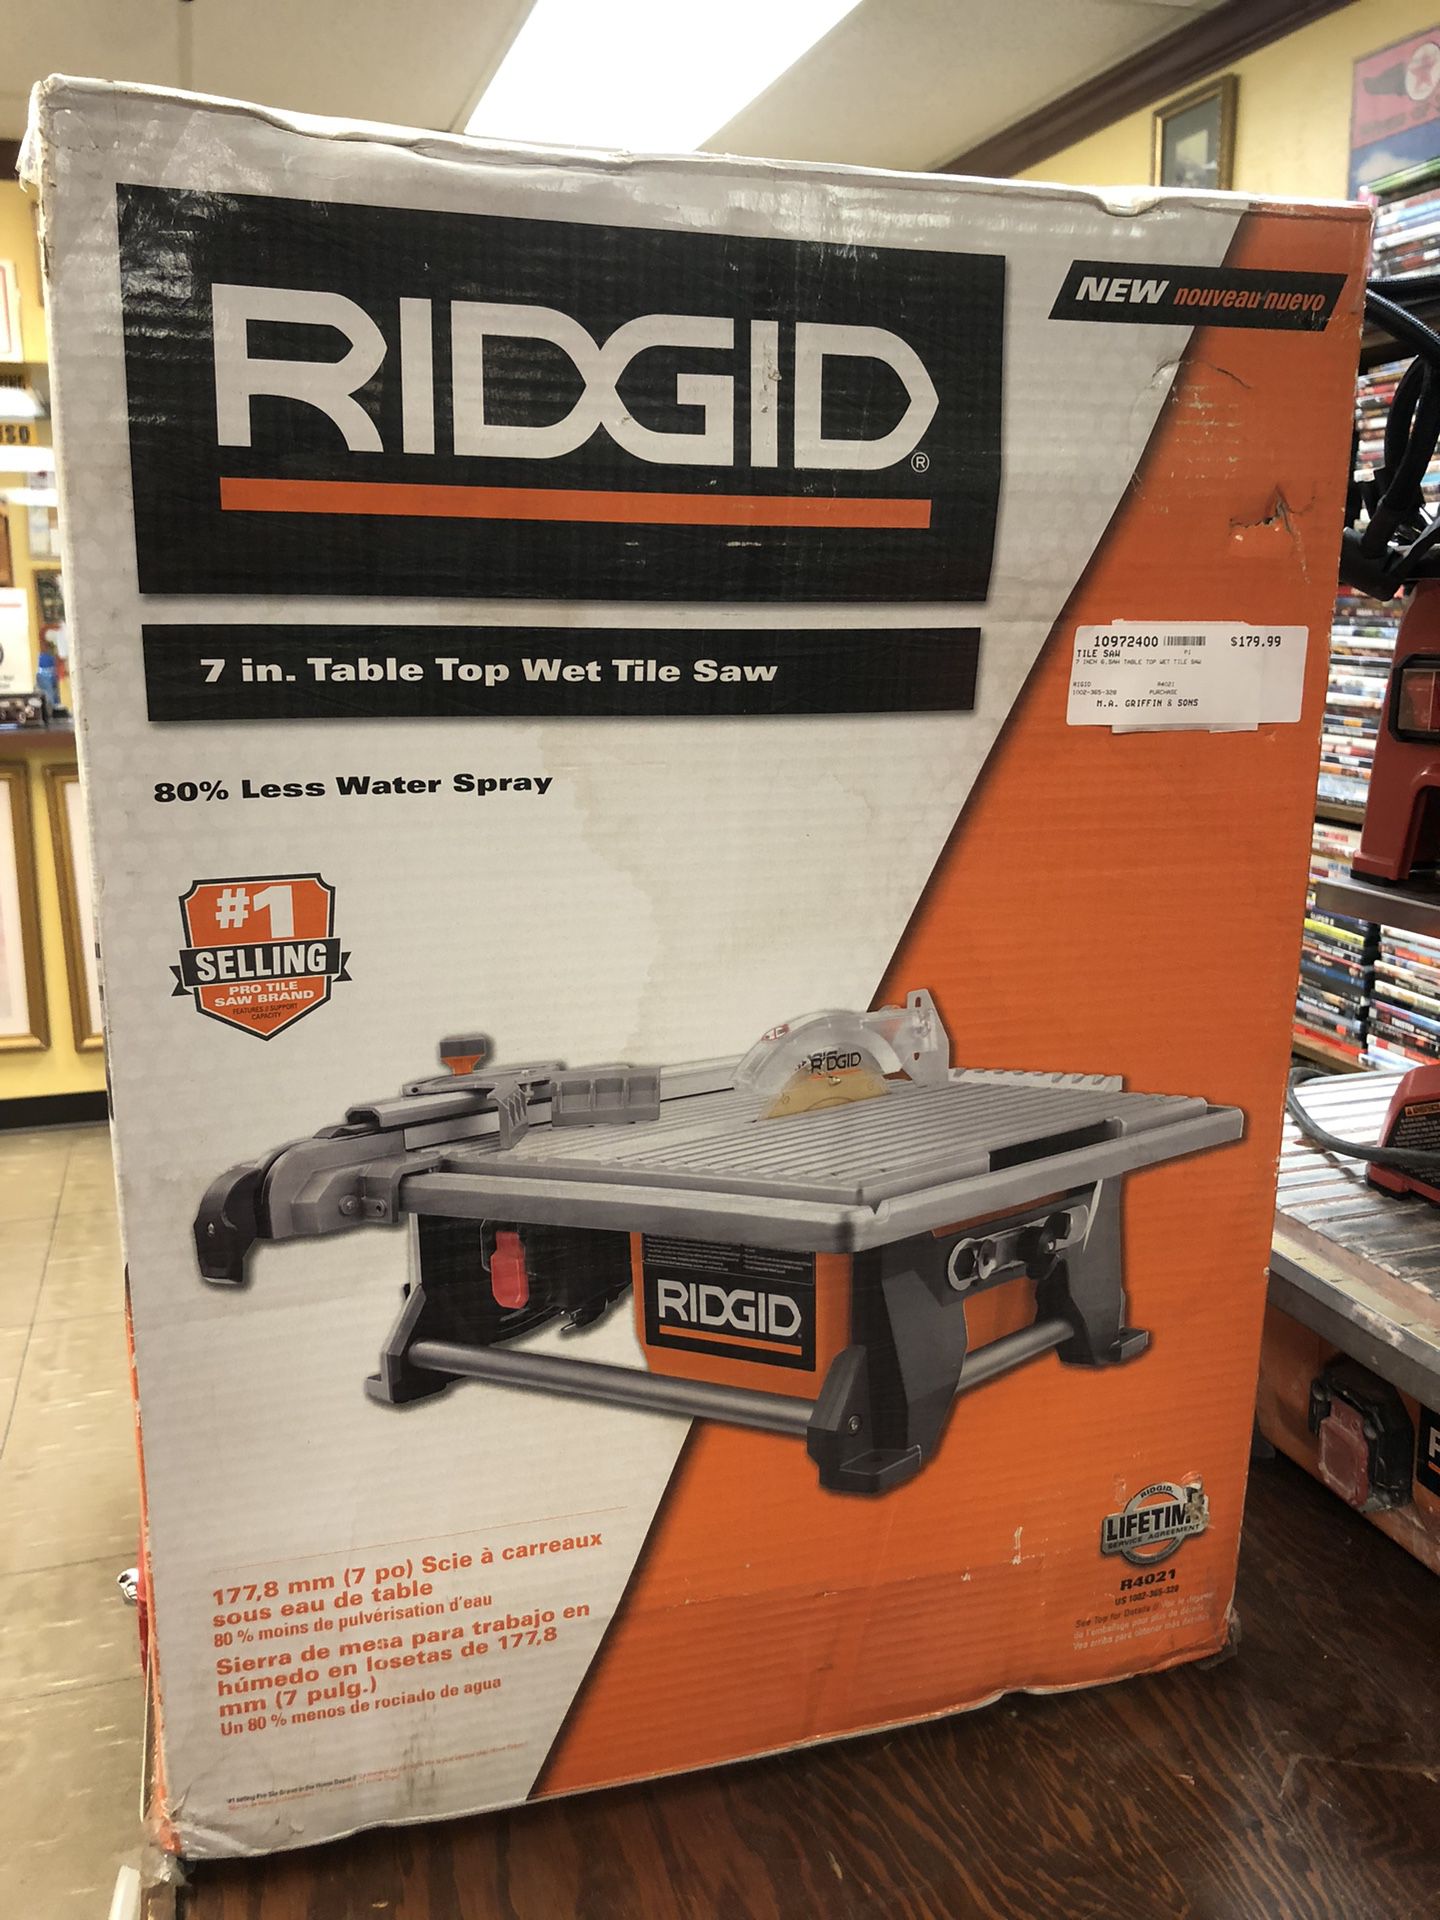 Rigid 7” 6.5ah Table Top Wet Tile Saw In Box for Sale in Bakersfield, CA  OfferUp